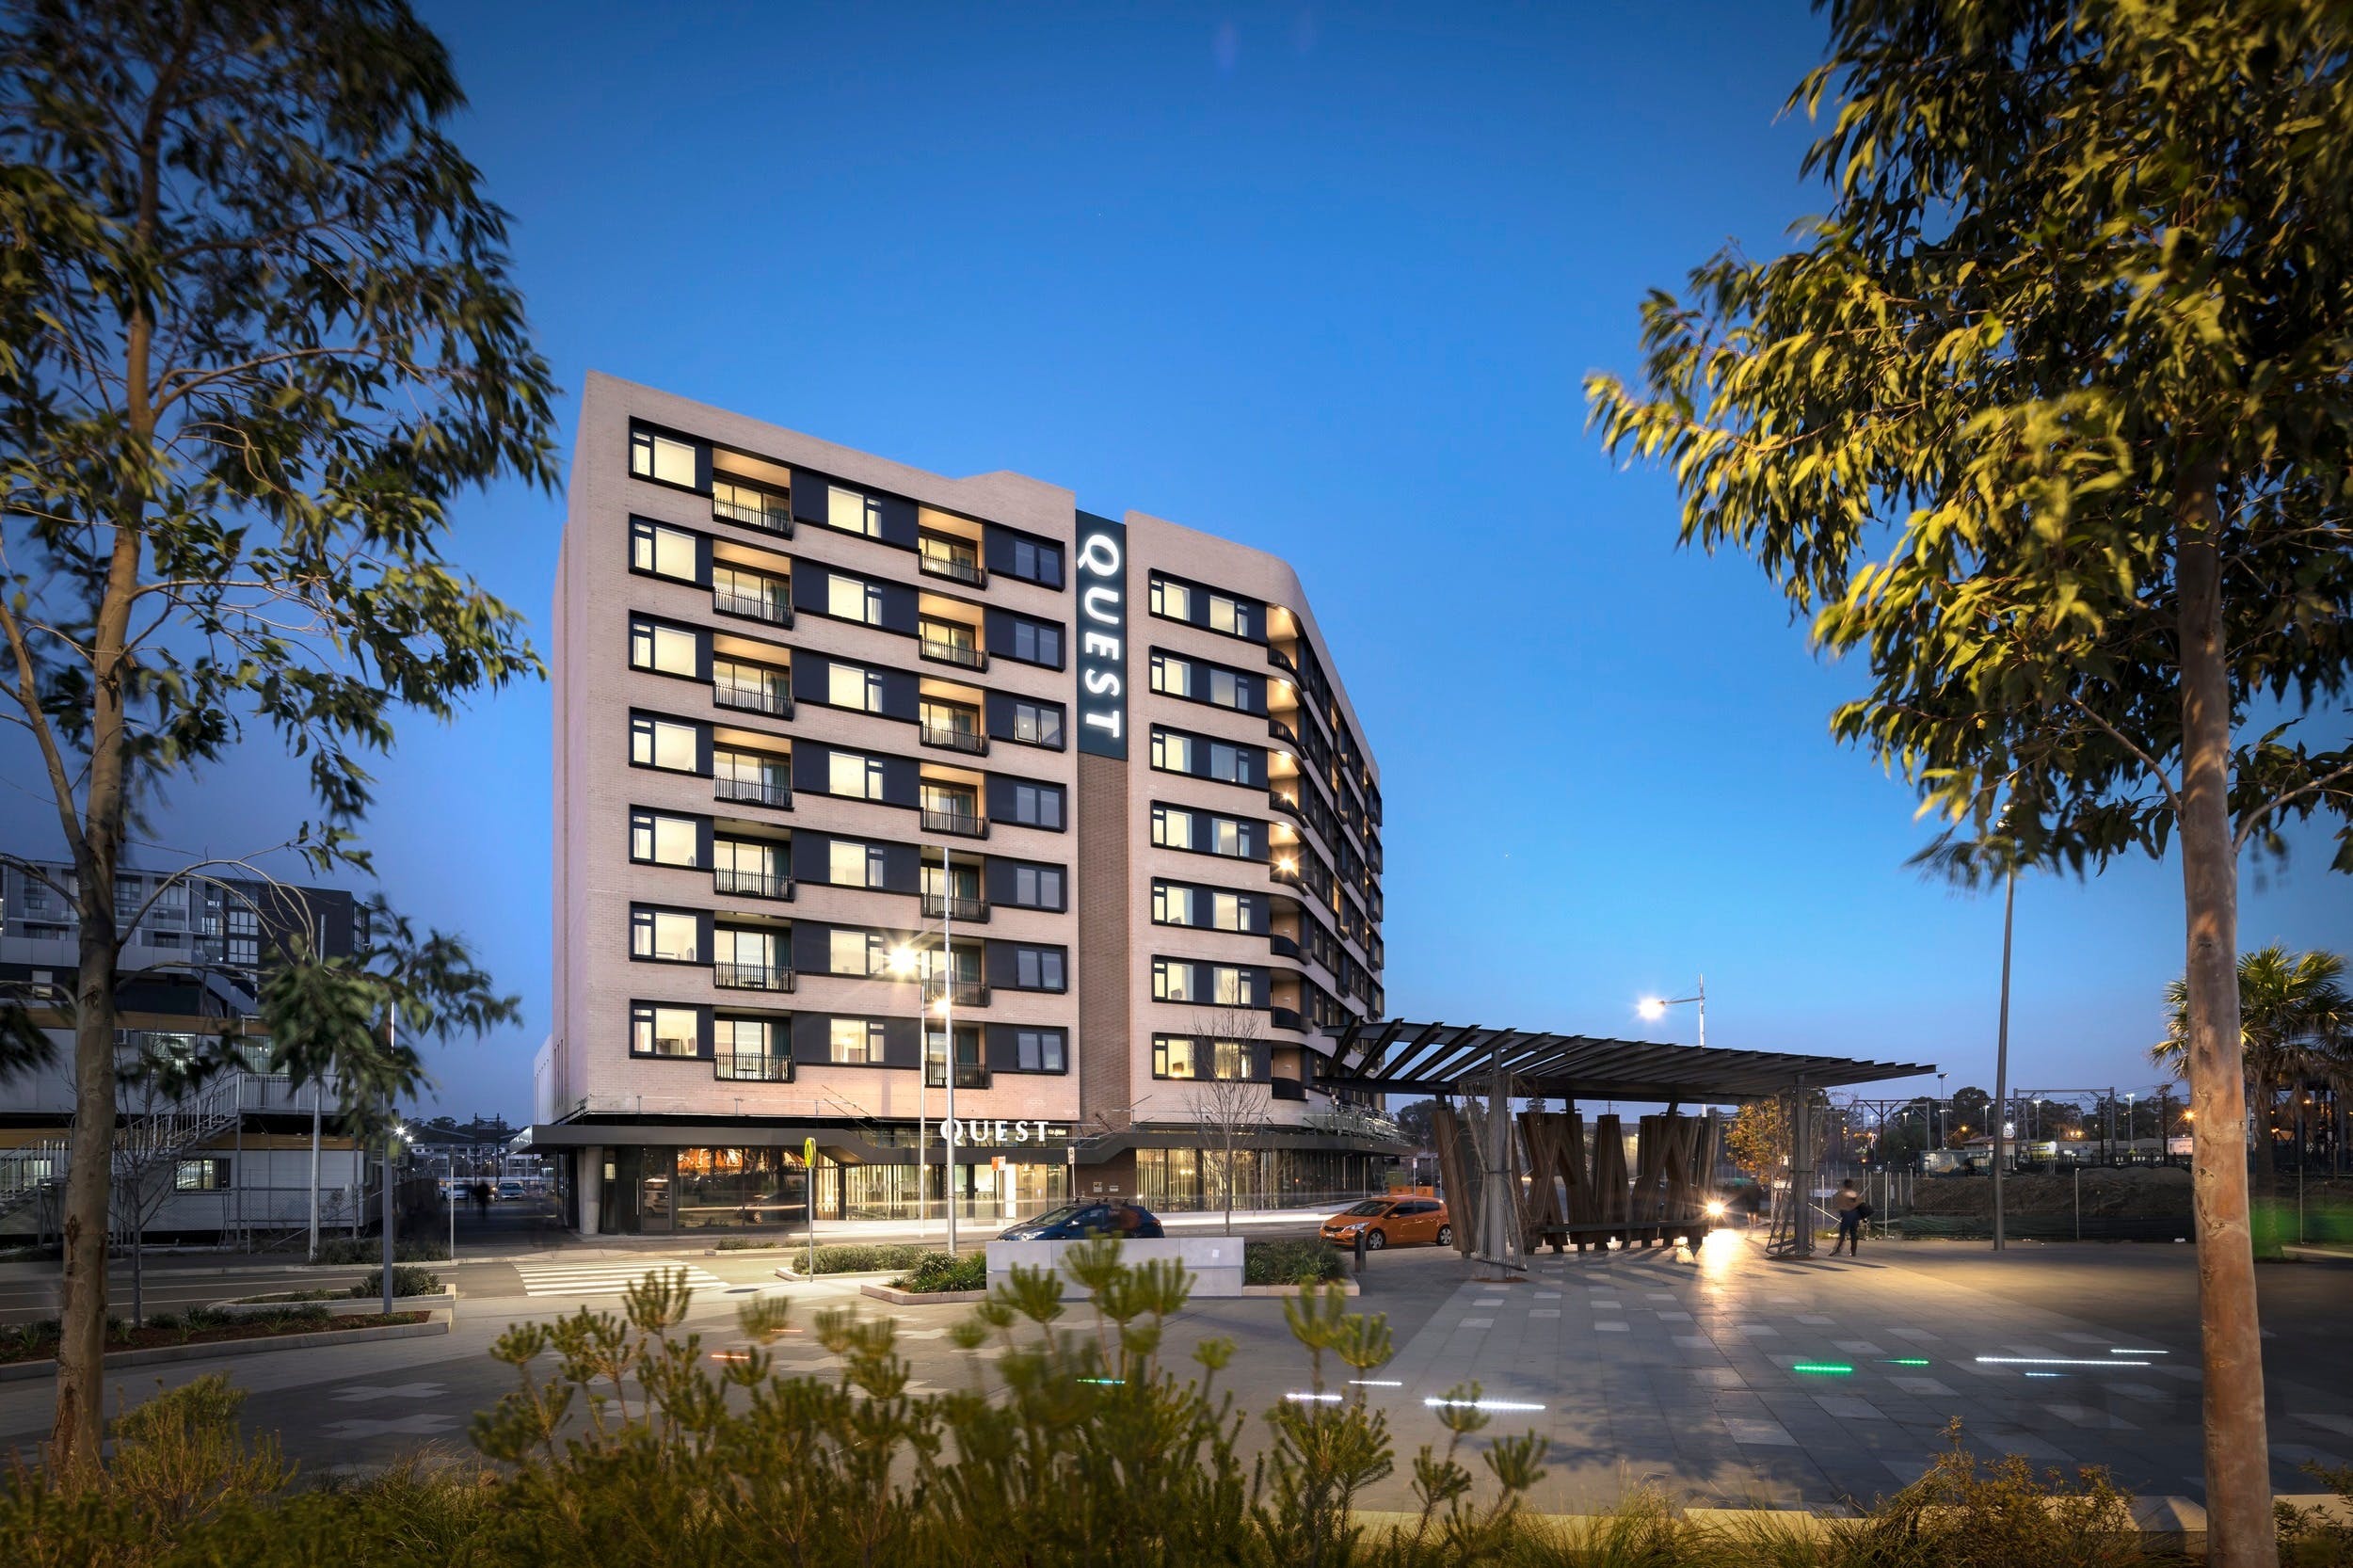 Quest Penrith - Coogee Beach Accommodation